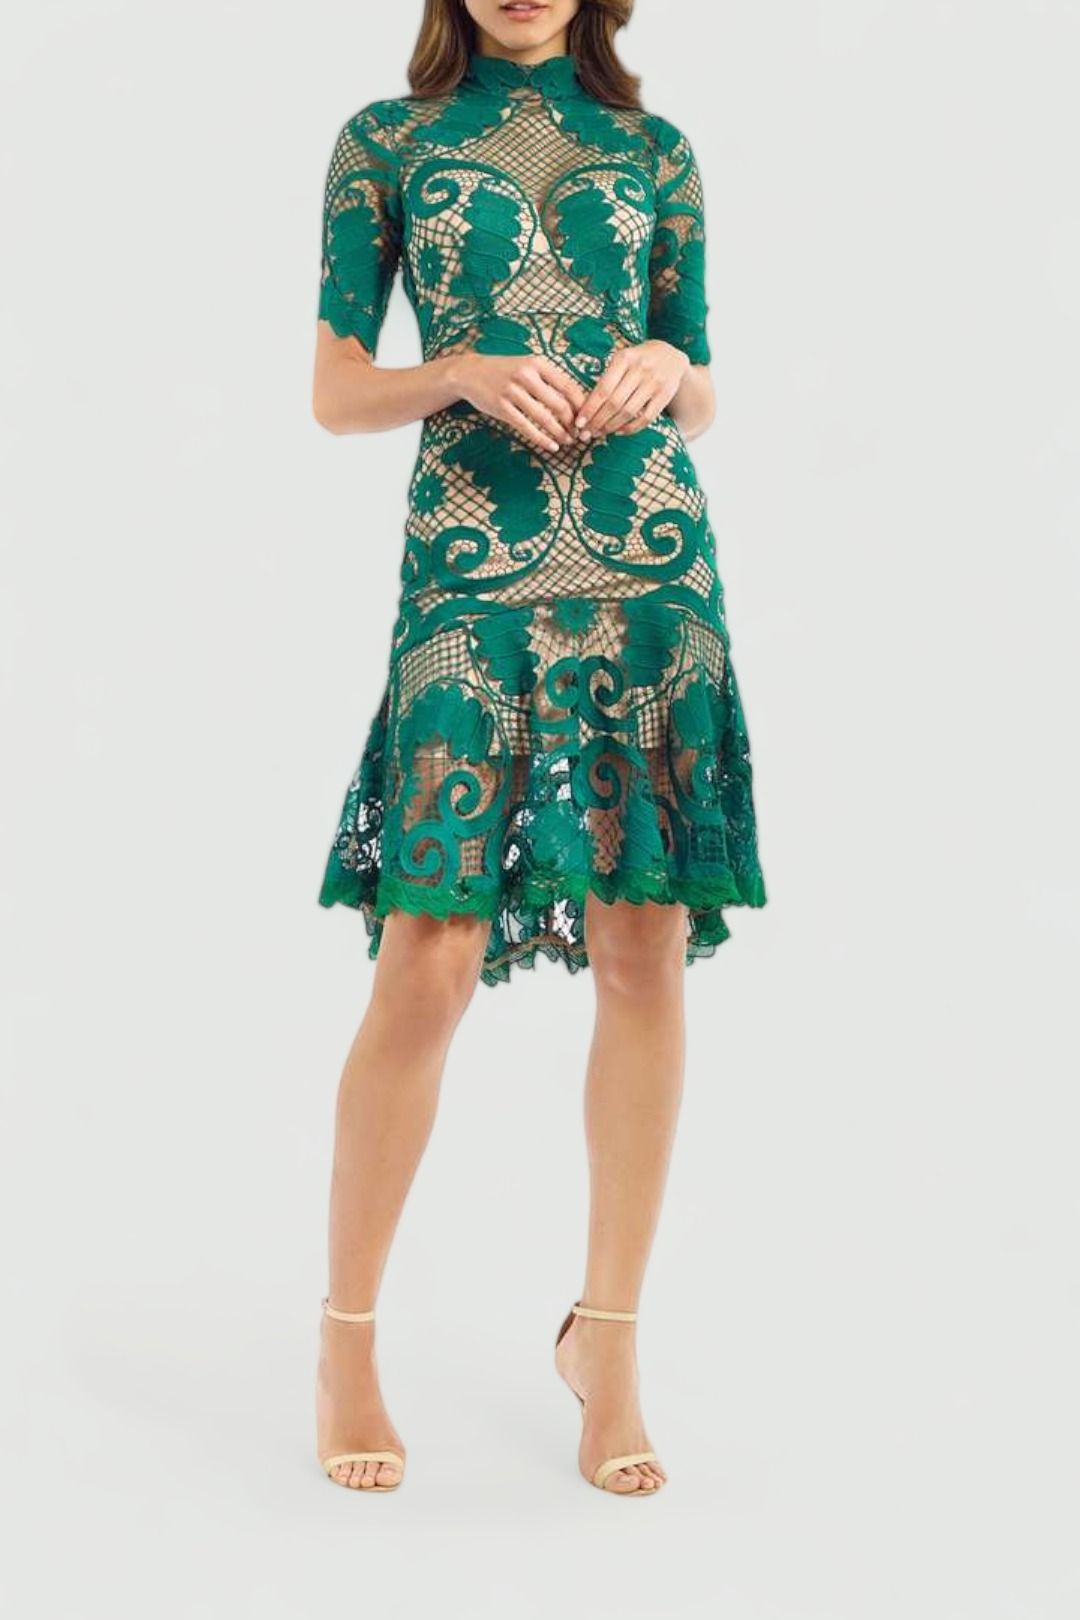 Thurley - Babylon Lace Dress - Emerald - Front